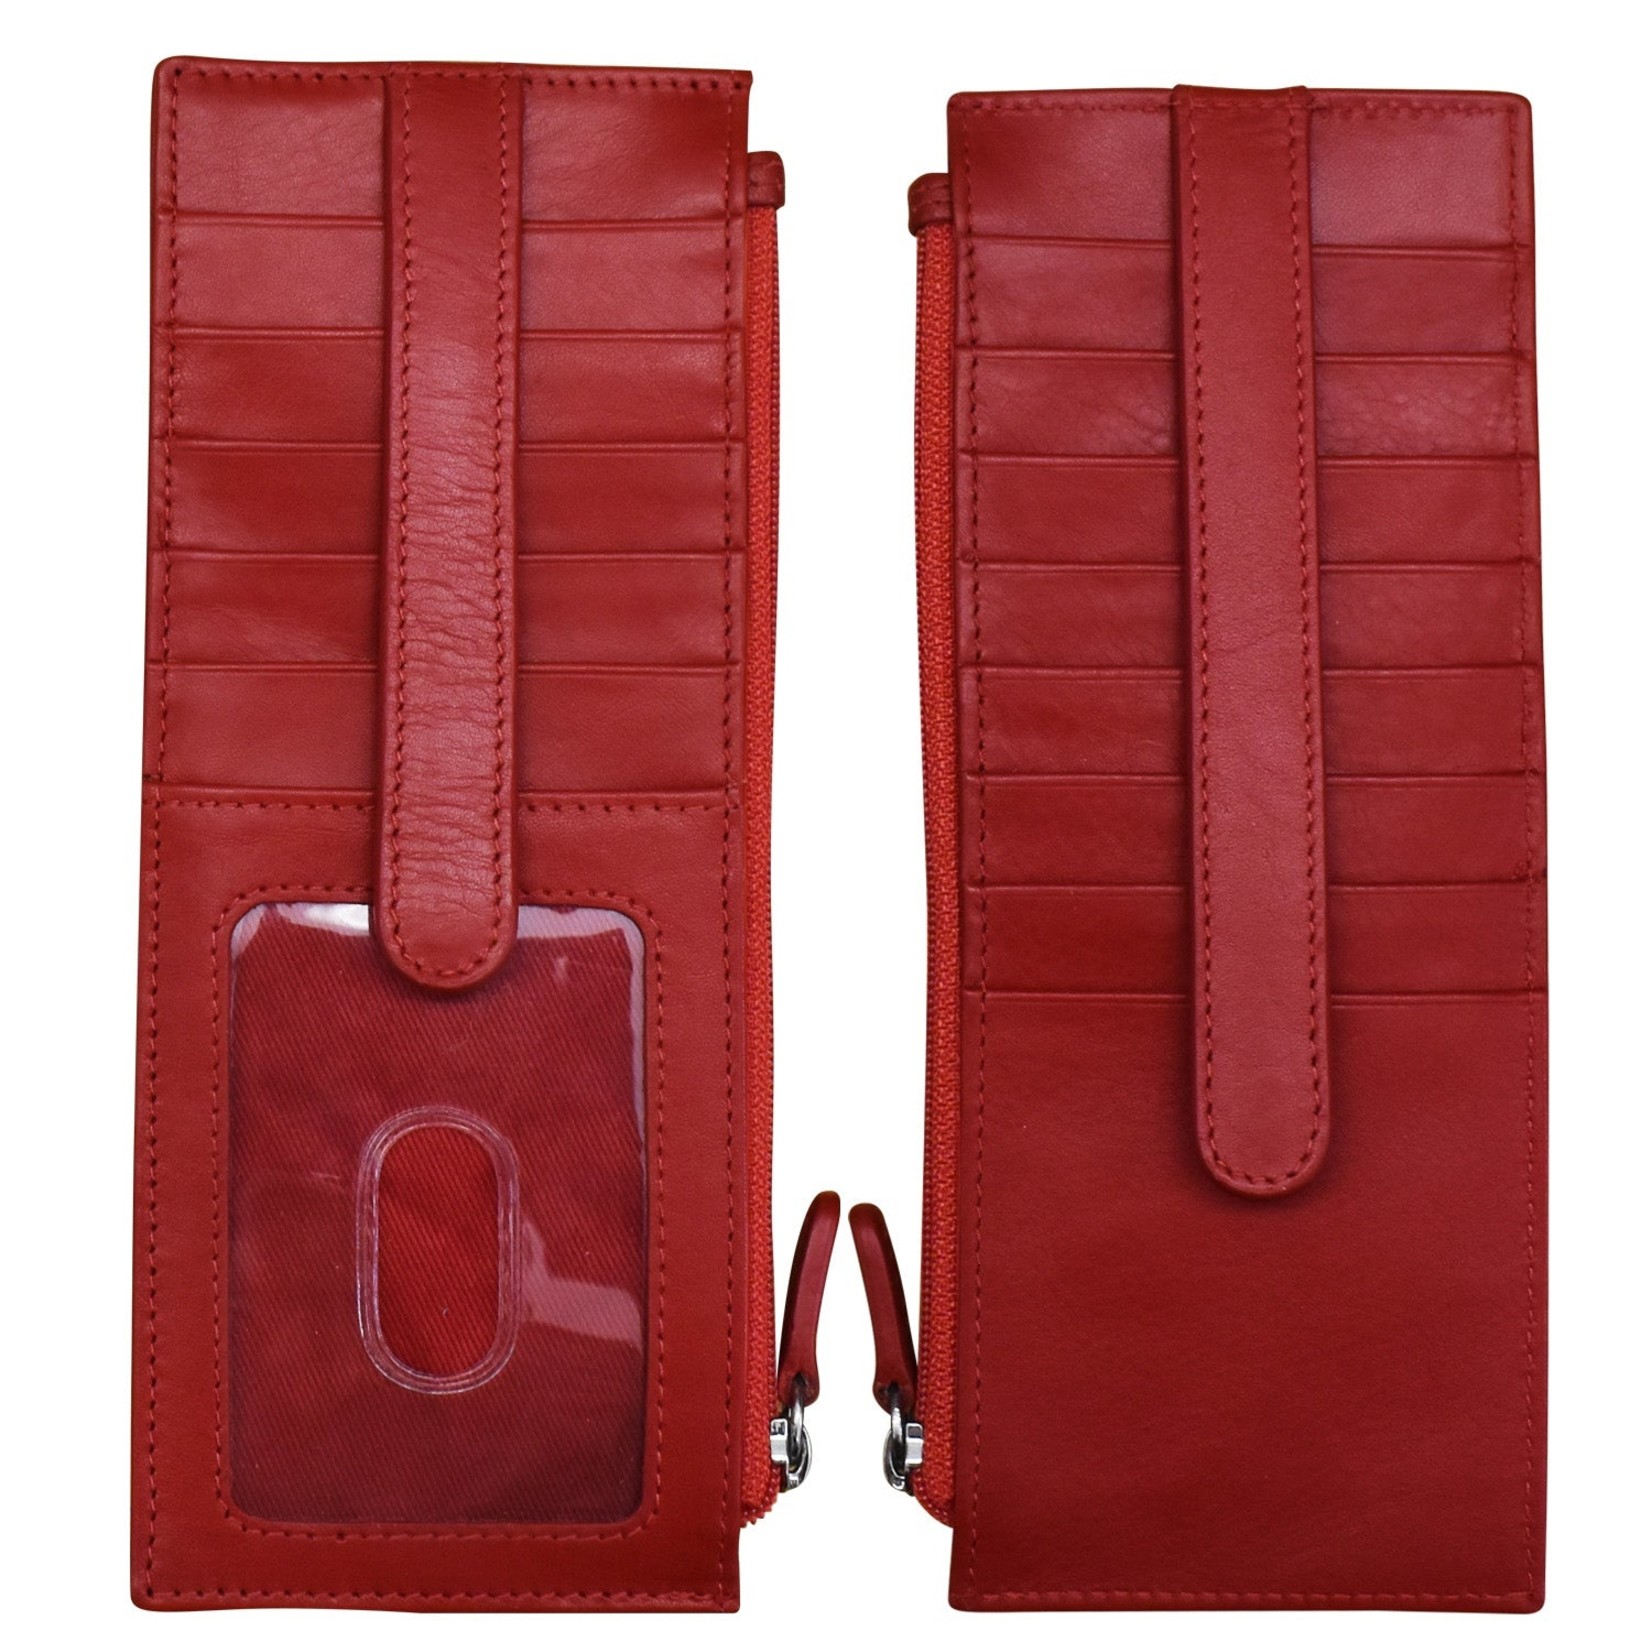 Leather Handbags and Accessories 7800 Red - RFID Card Holder